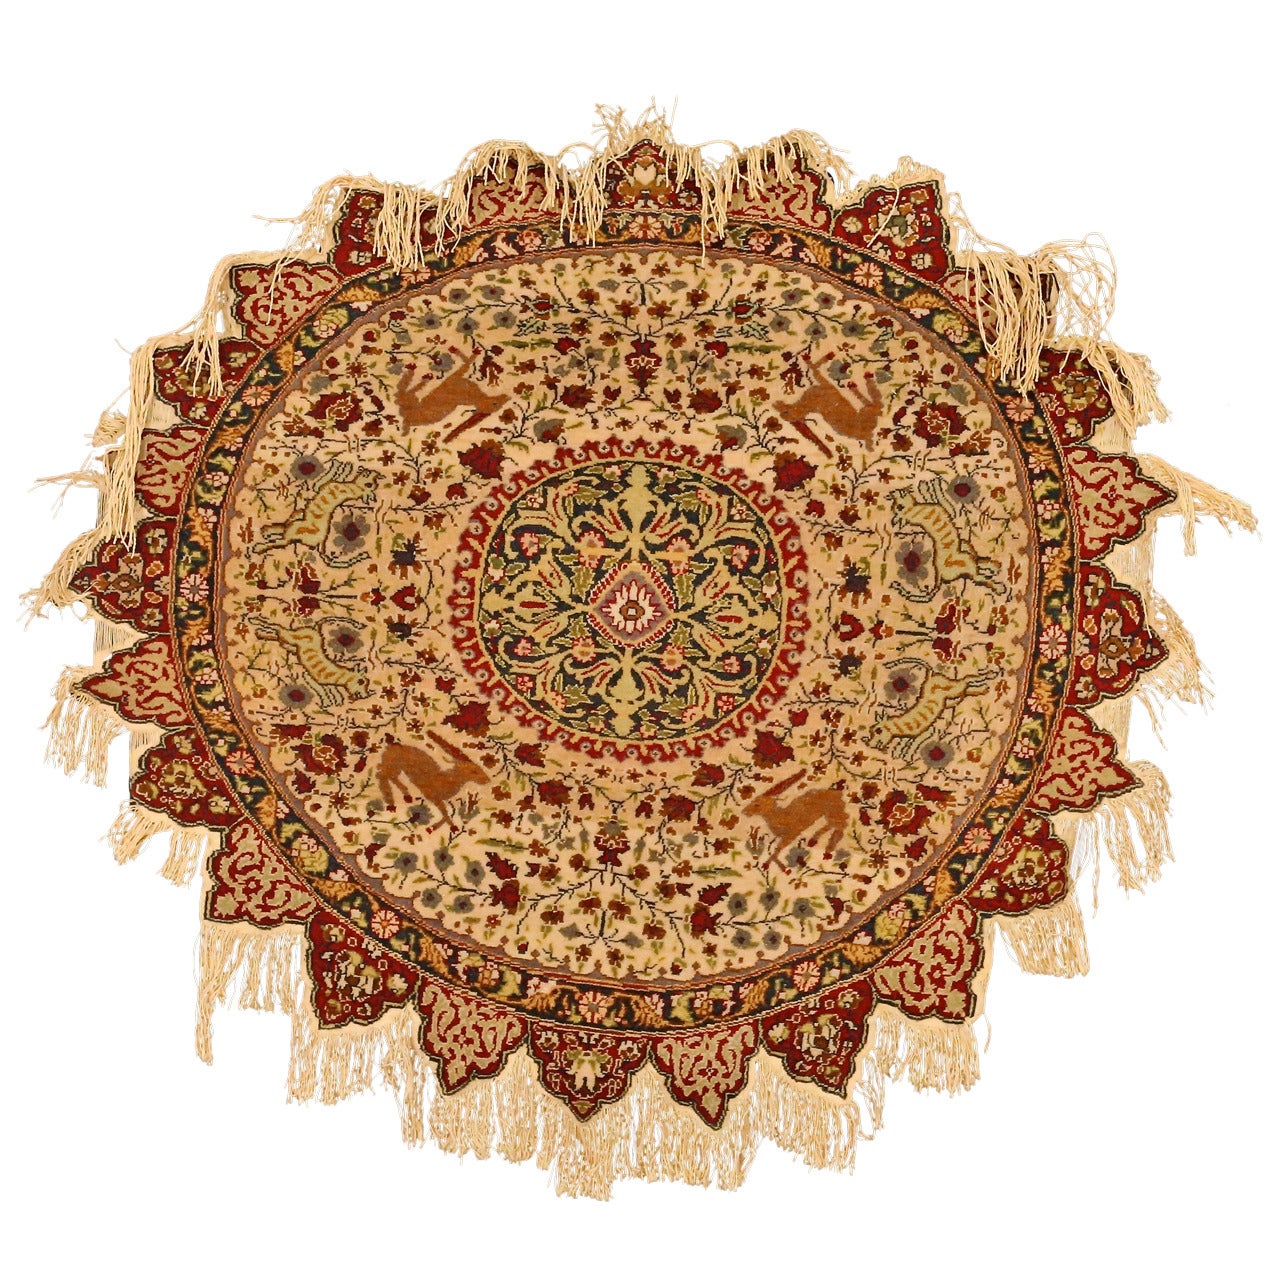 Unusual Antique Turkish Kayseri Table Cover Carpet For Sale